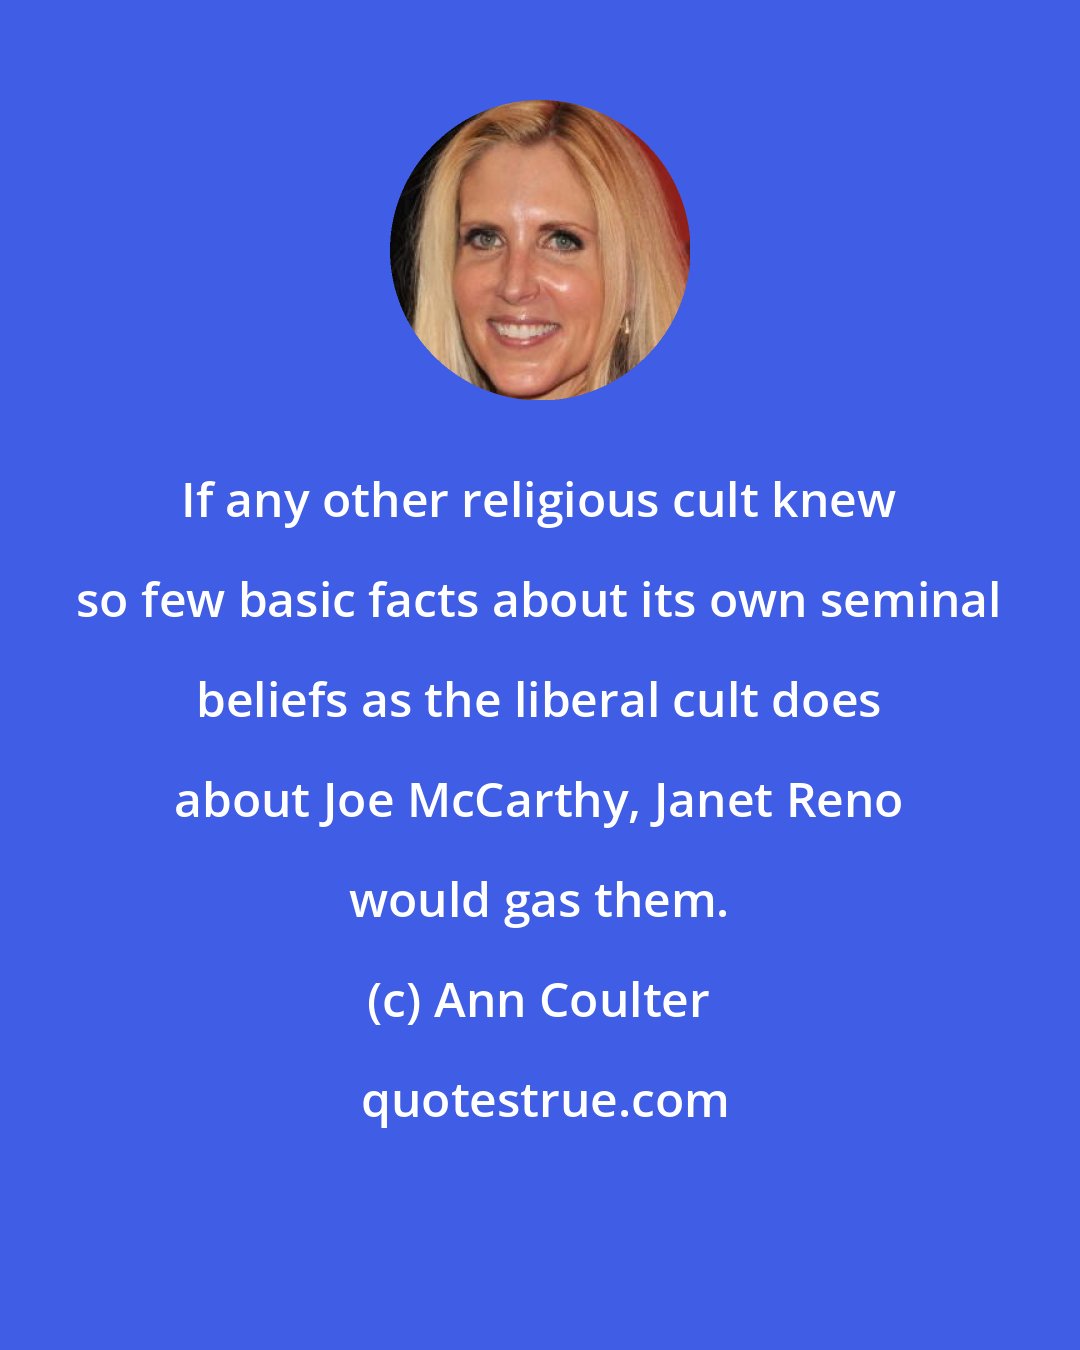 Ann Coulter: If any other religious cult knew so few basic facts about its own seminal beliefs as the liberal cult does about Joe McCarthy, Janet Reno would gas them.